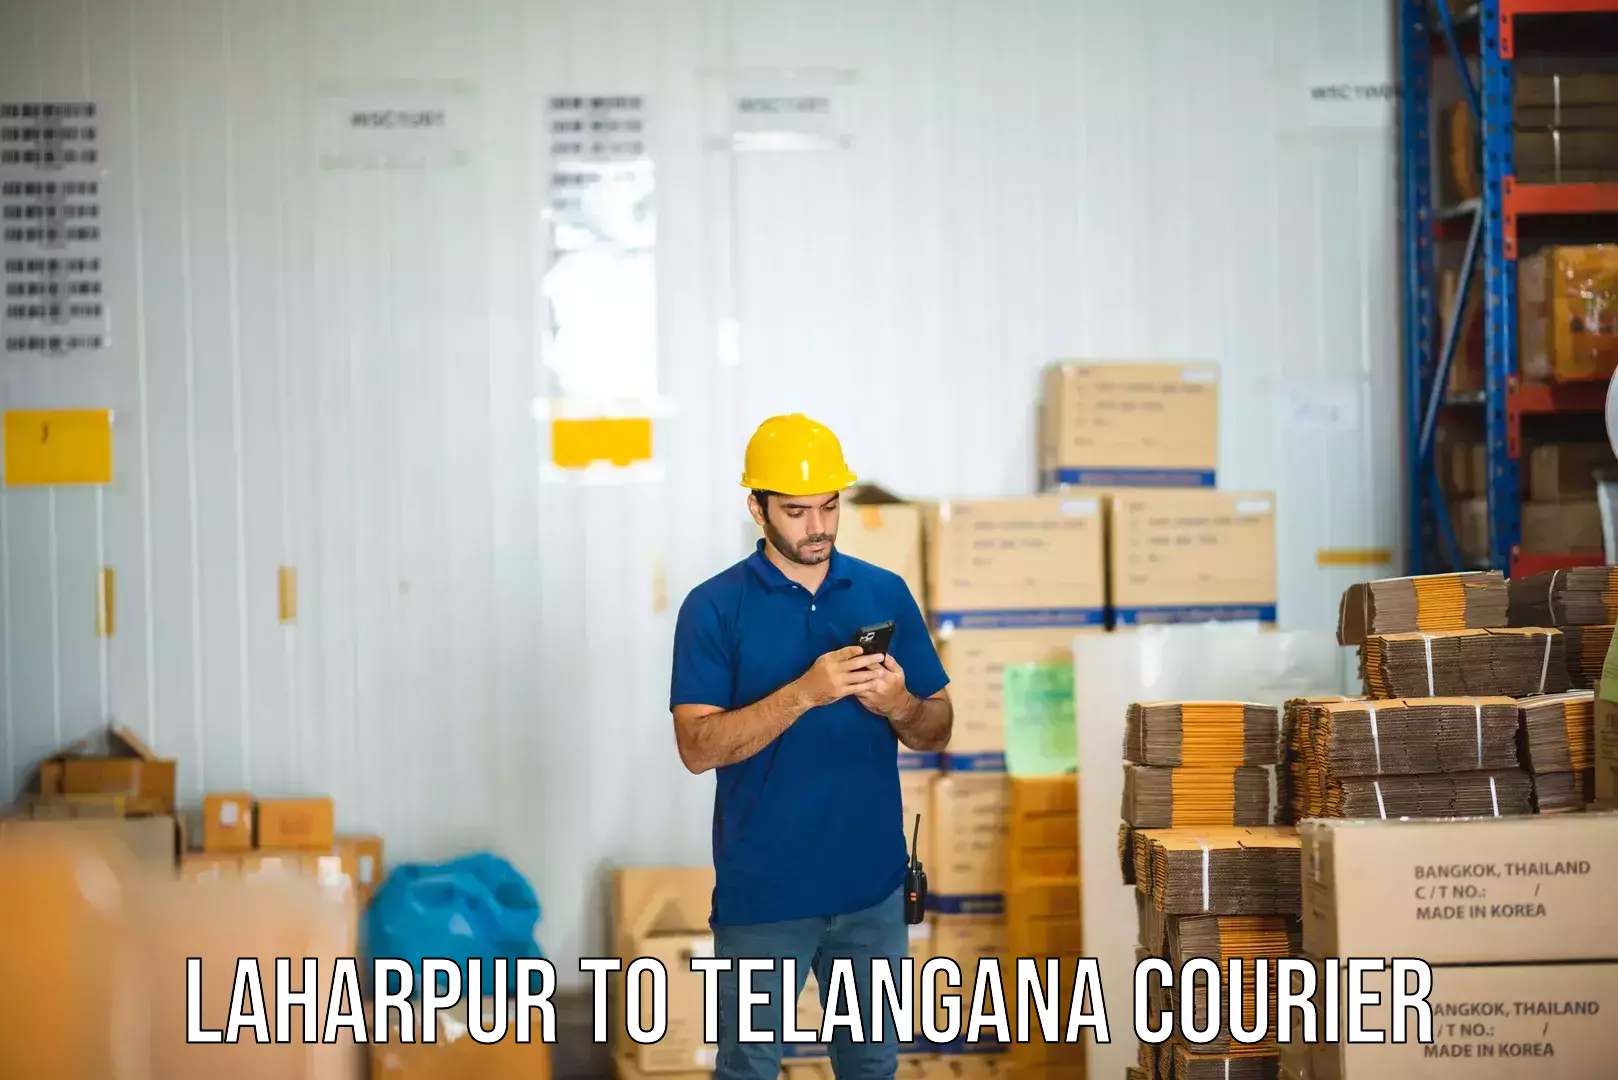 Flexible delivery scheduling Laharpur to Navipet